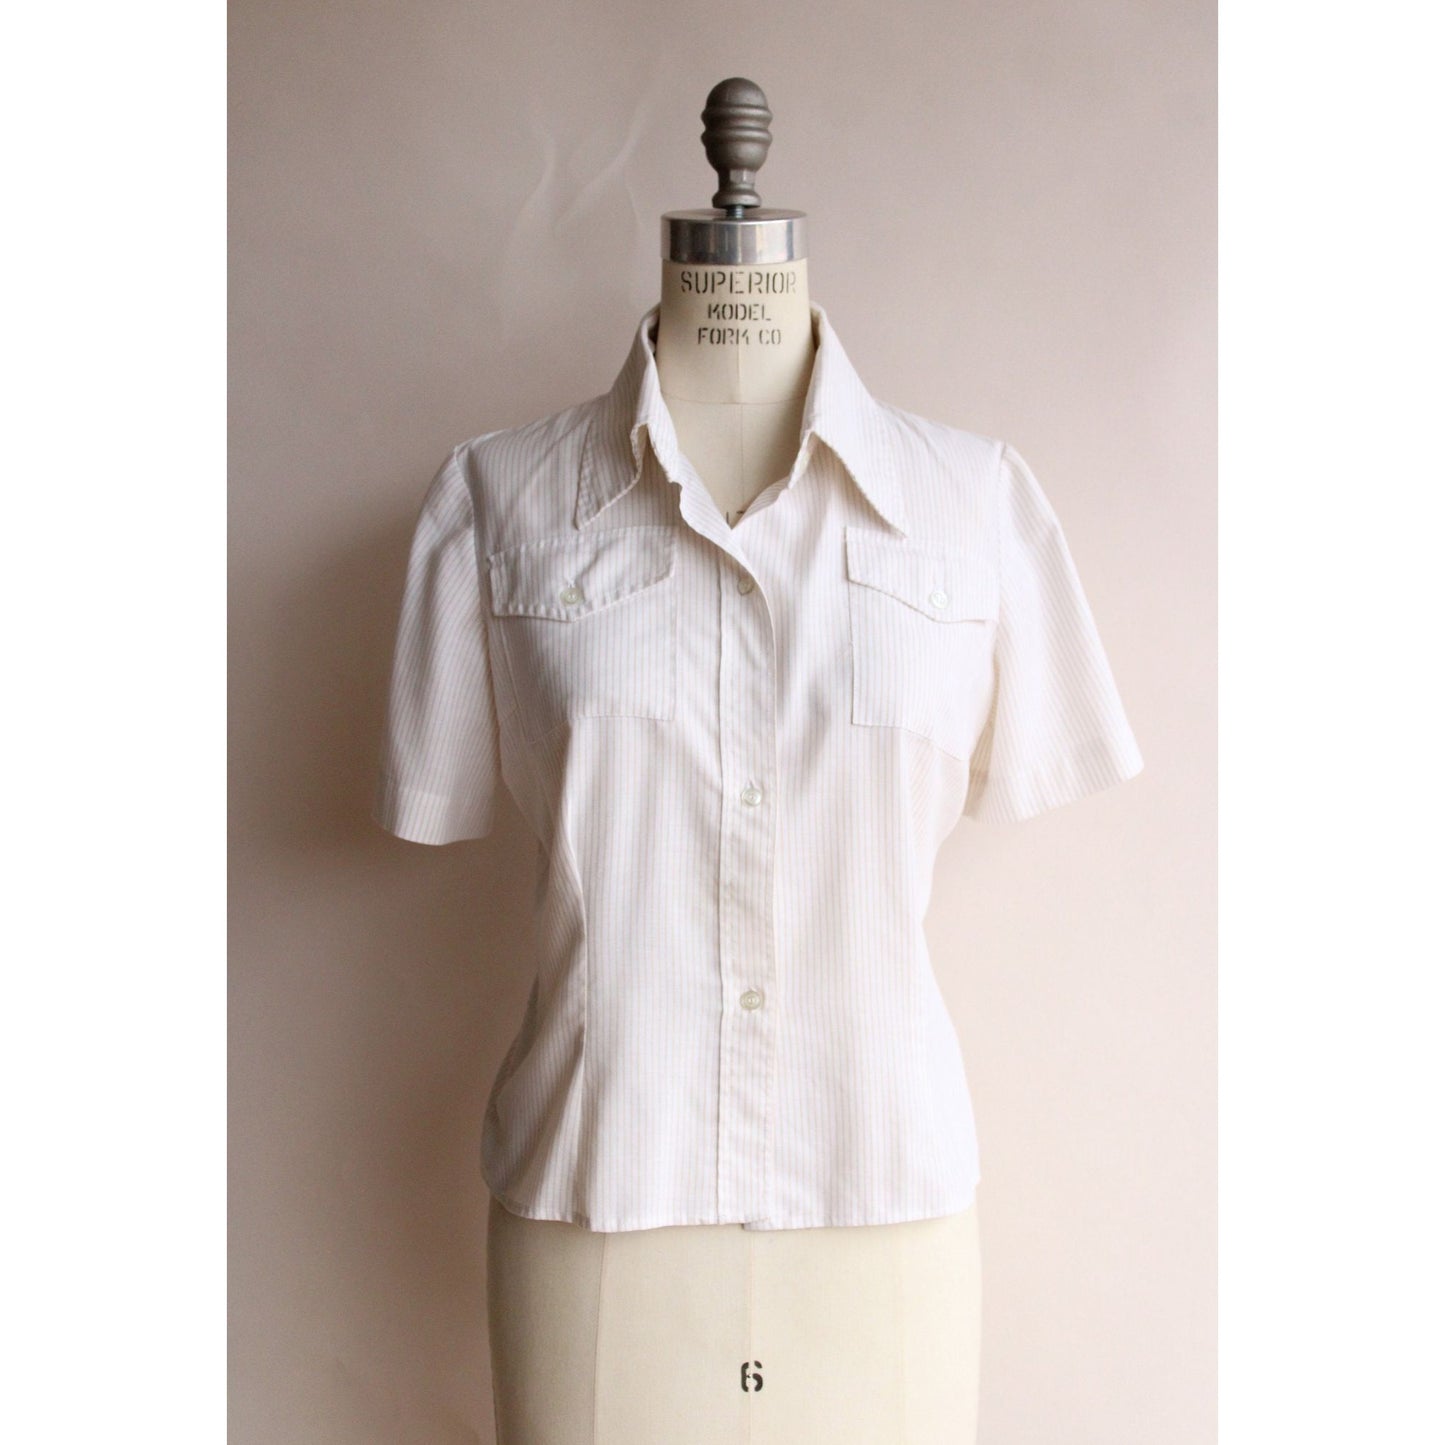 Vintage 1970s Tan and White Pinstriped Short Sleeved Shirt